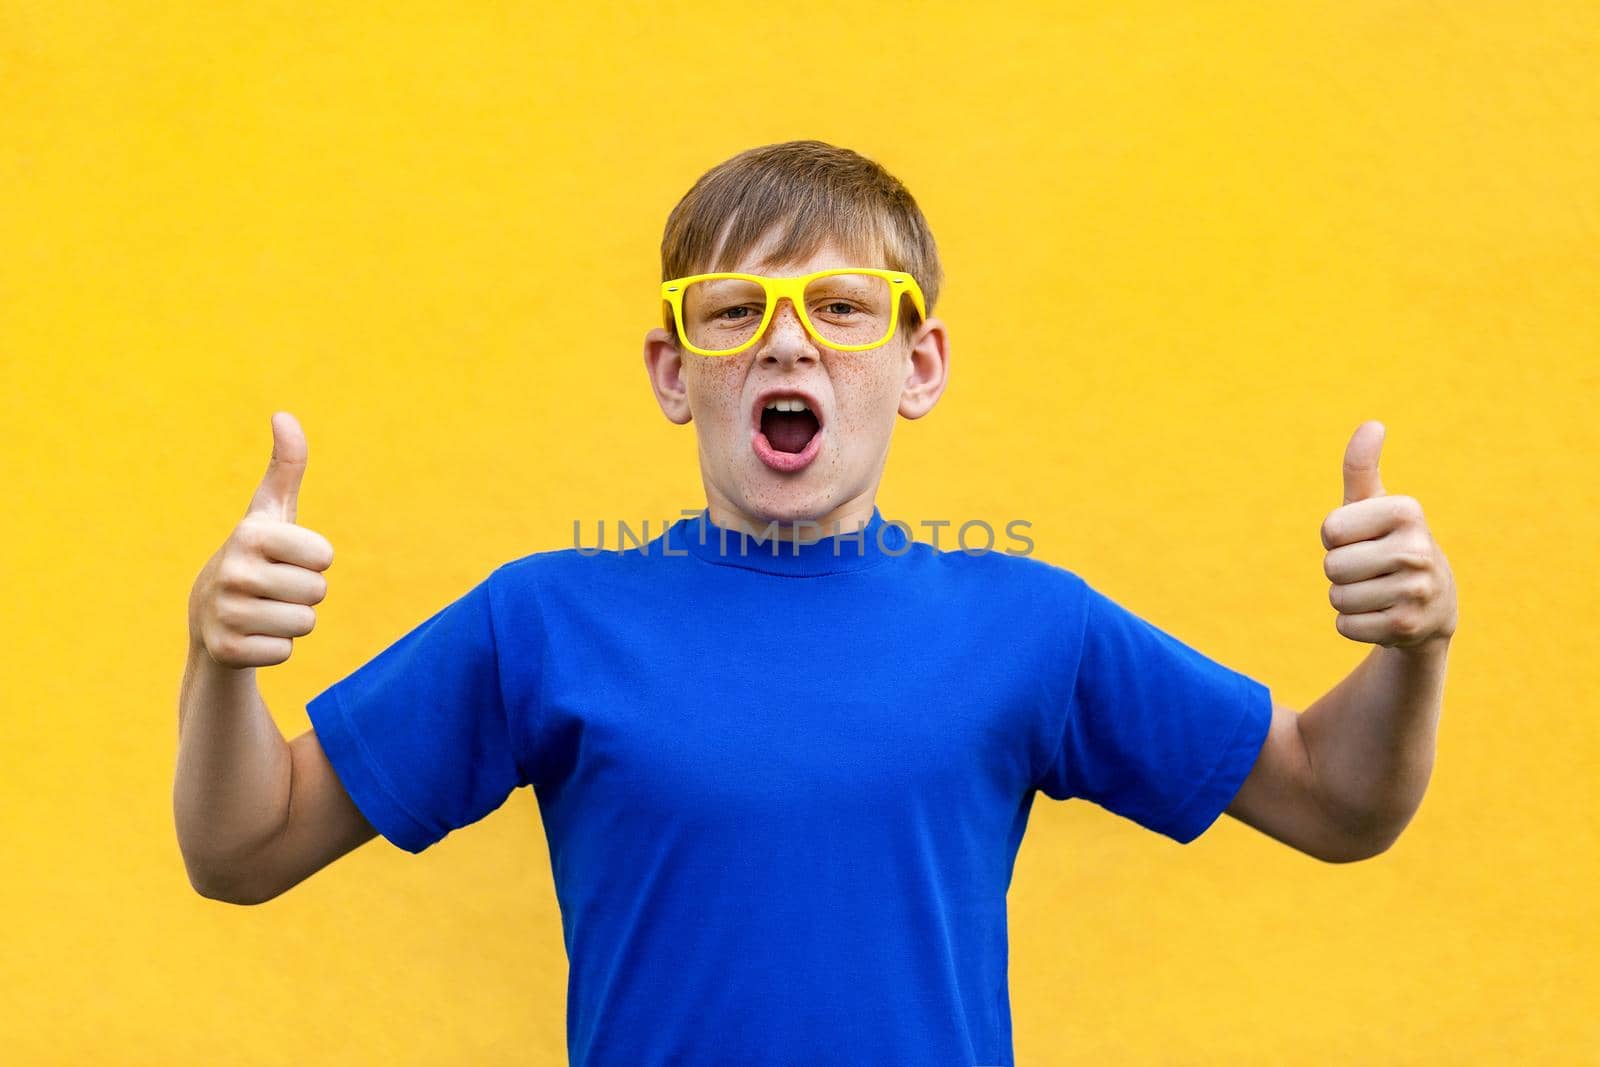 Happiness thumbs up, looking at camera and toothy smile. Studio shot, yellow background